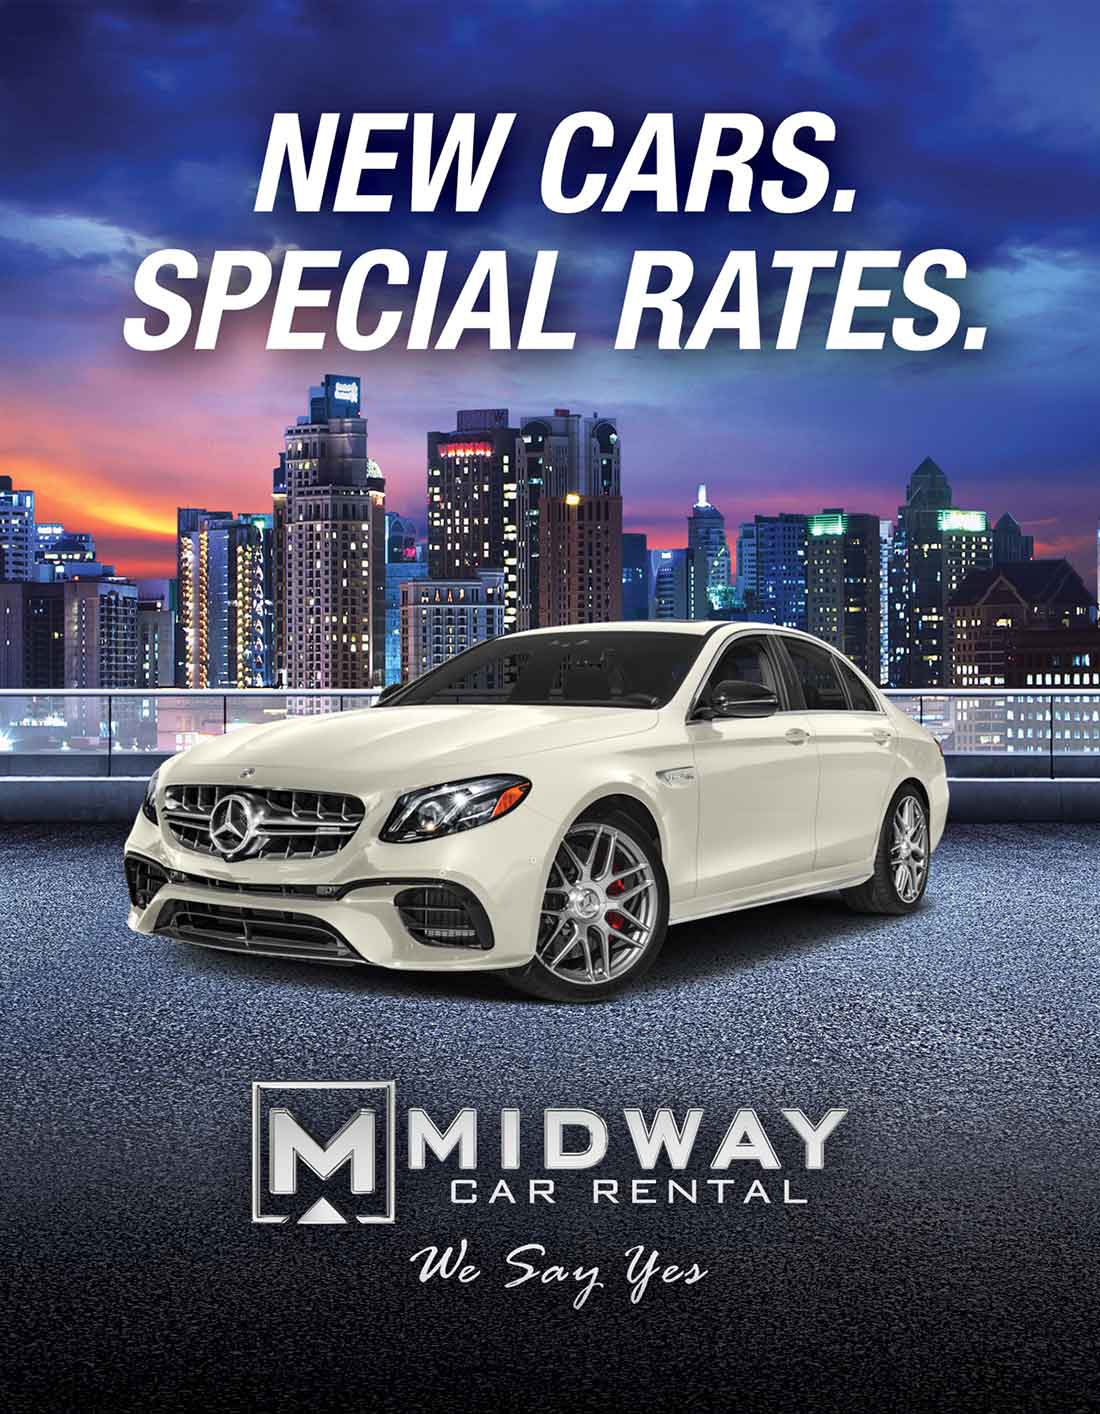 Midway Car Rental Location Sign